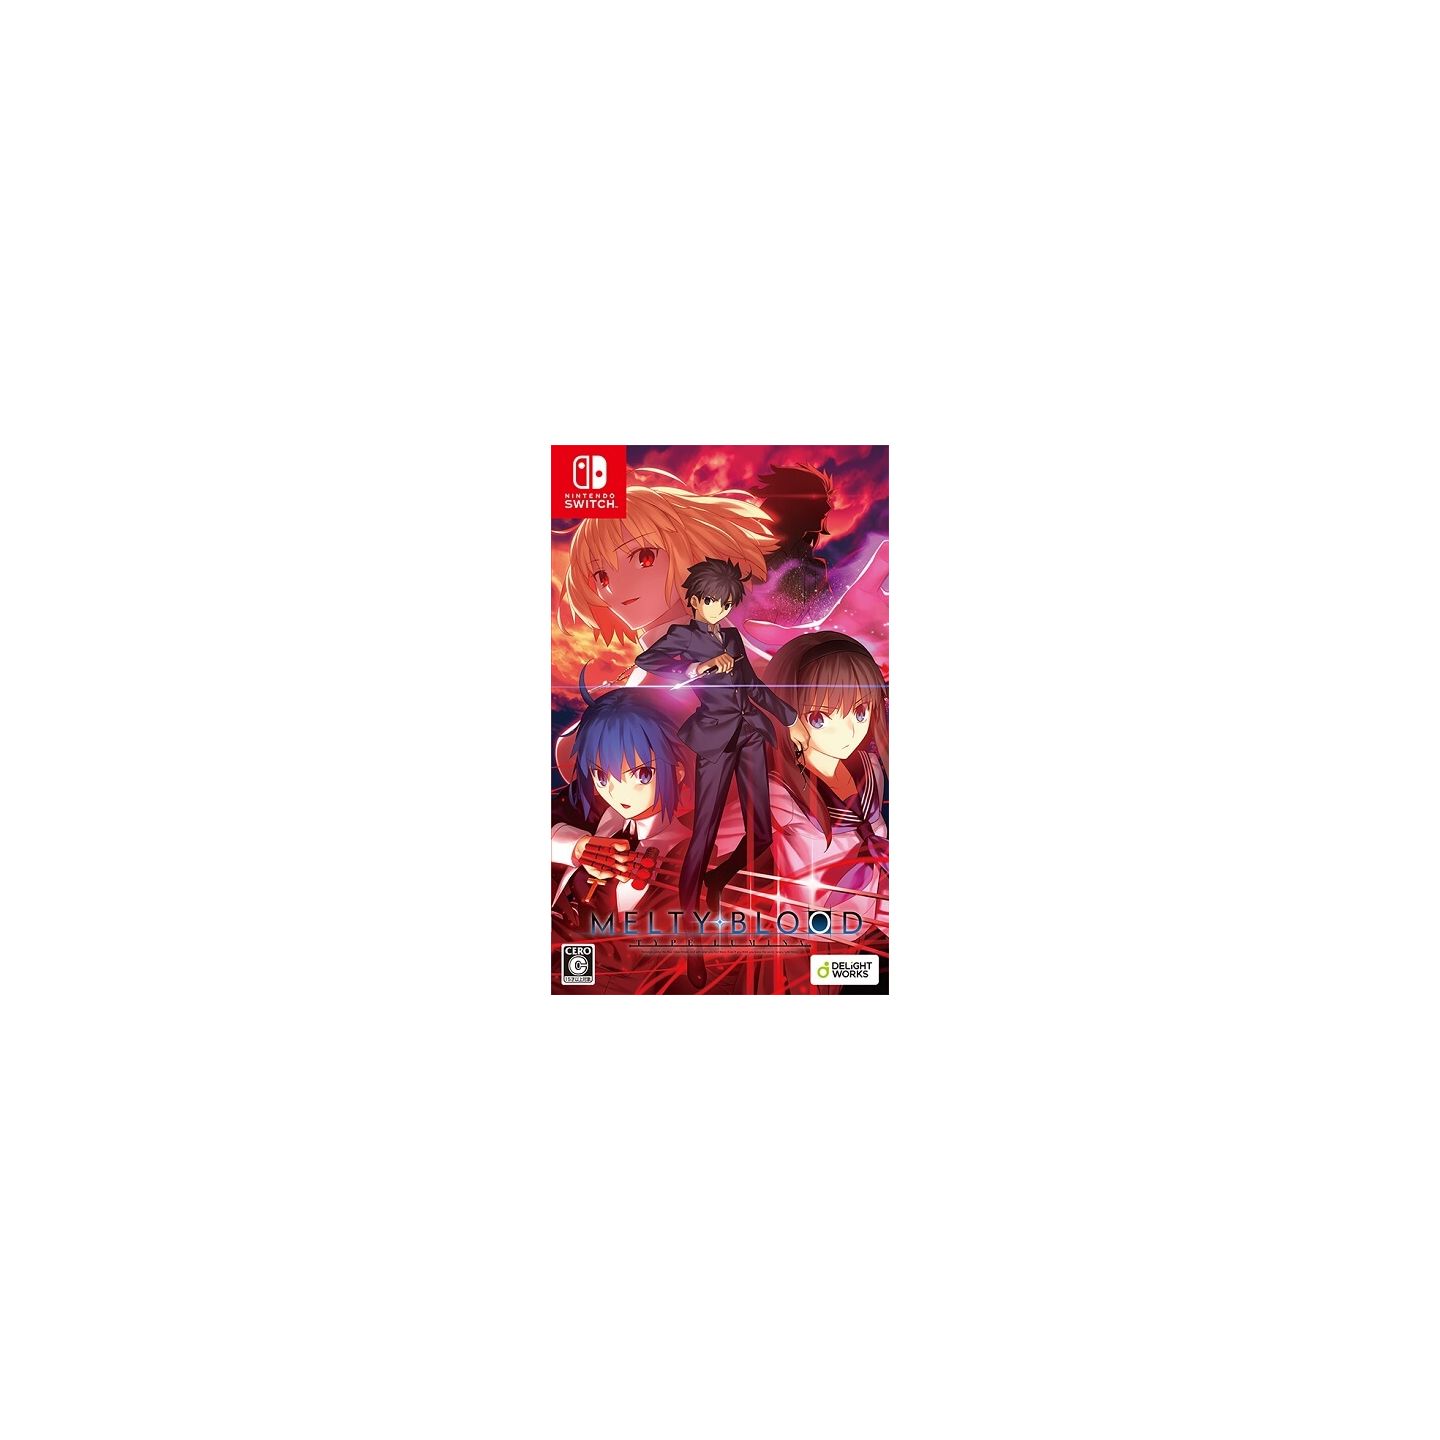 Delightworks - Melty Blood Type Lumina for Nintendo Switch